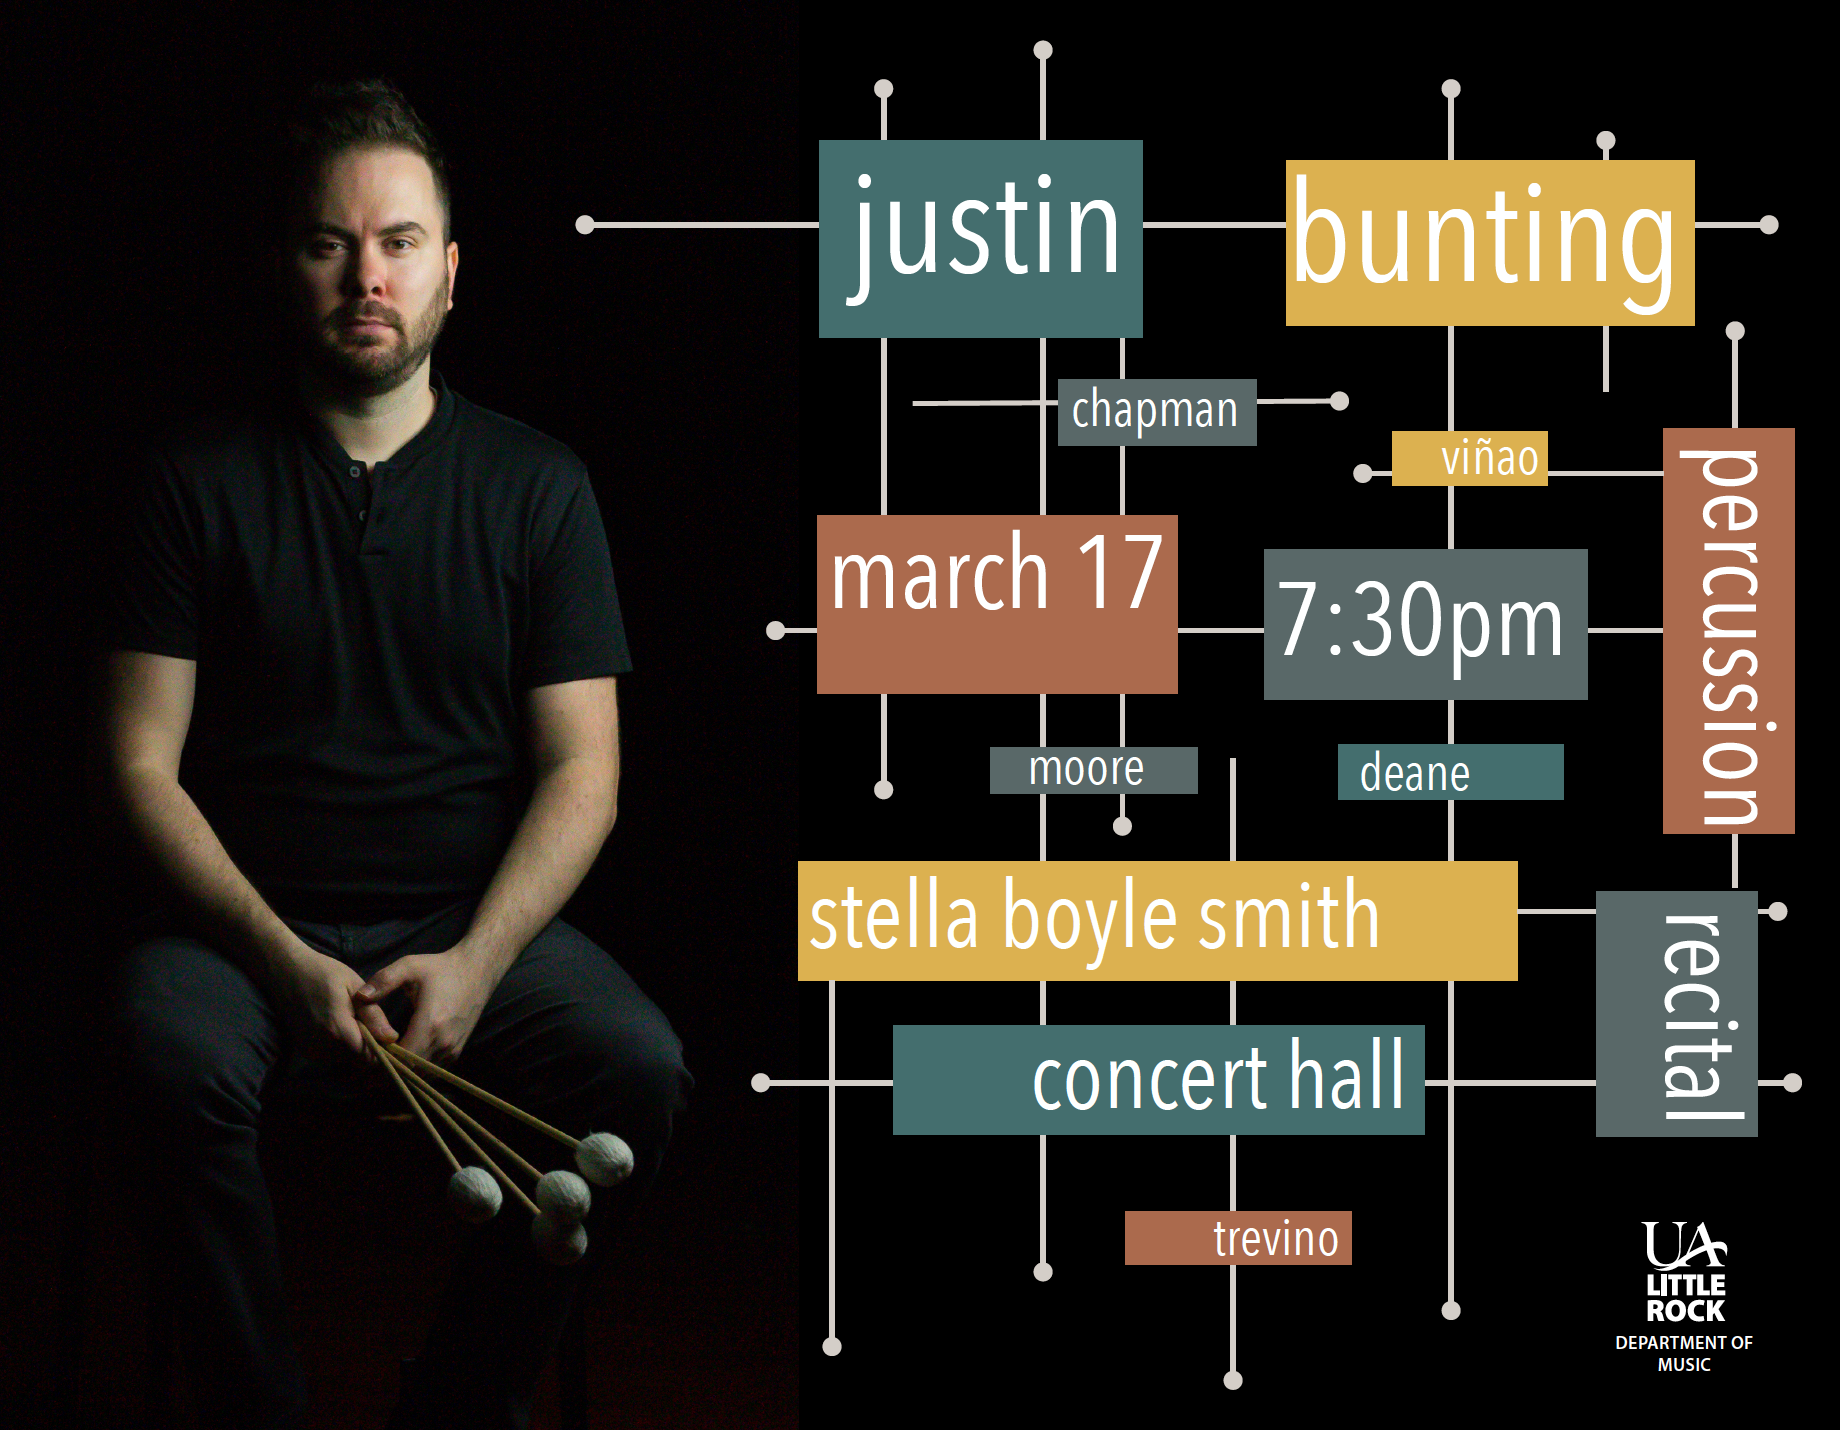 Dr. Justin Bunting, director of percussion studies, will present a diverse program of music in his first faculty percussion recital at UA Little Rock.